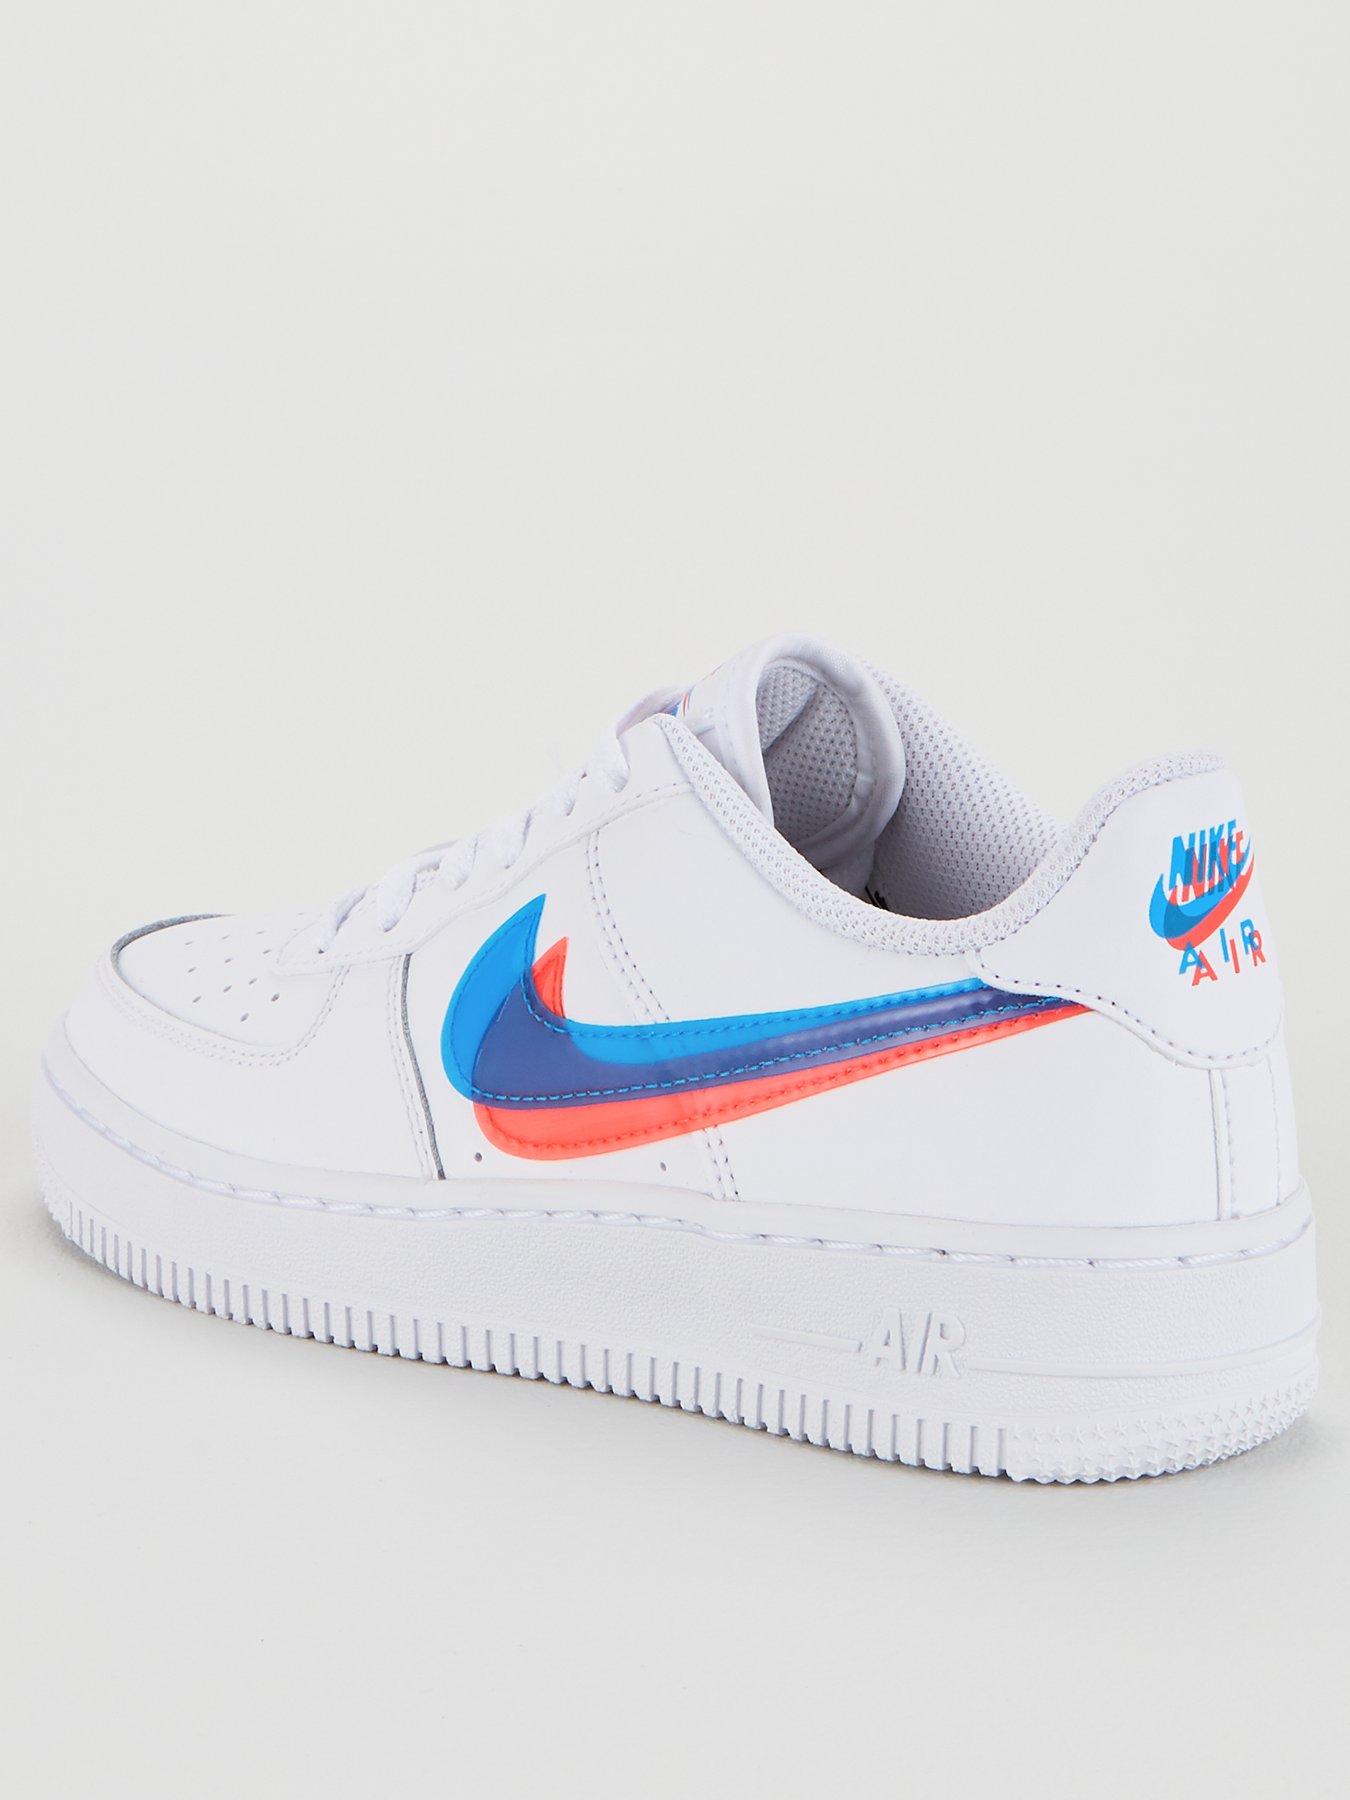 nike air force 1 womens red tick